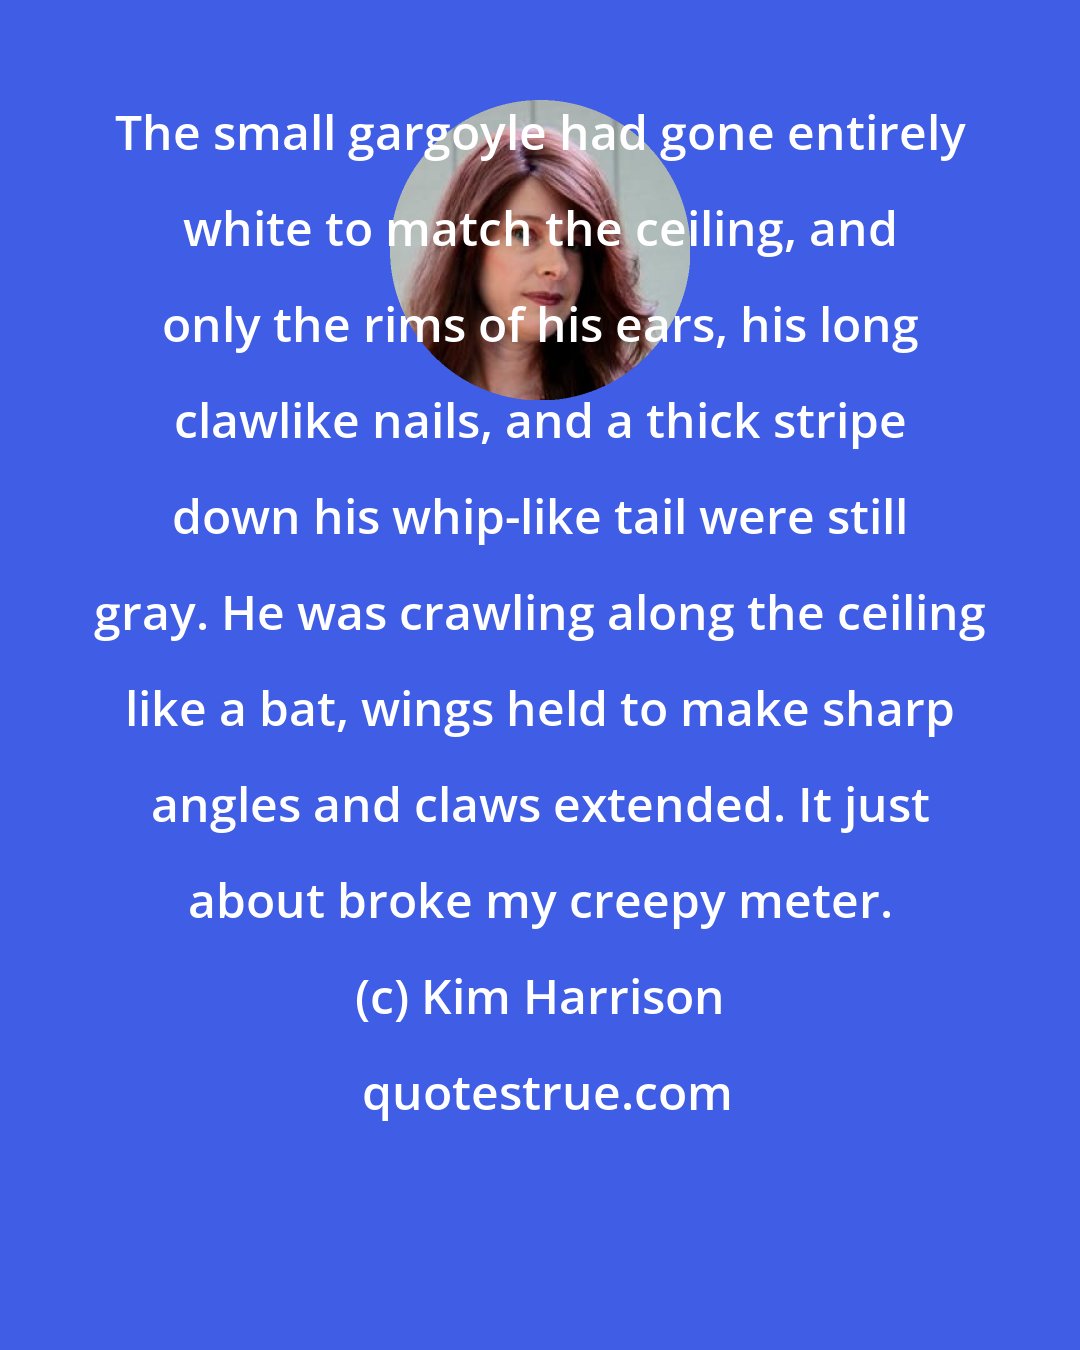 Kim Harrison: The small gargoyle had gone entirely white to match the ceiling, and only the rims of his ears, his long clawlike nails, and a thick stripe down his whip-like tail were still gray. He was crawling along the ceiling like a bat, wings held to make sharp angles and claws extended. It just about broke my creepy meter.